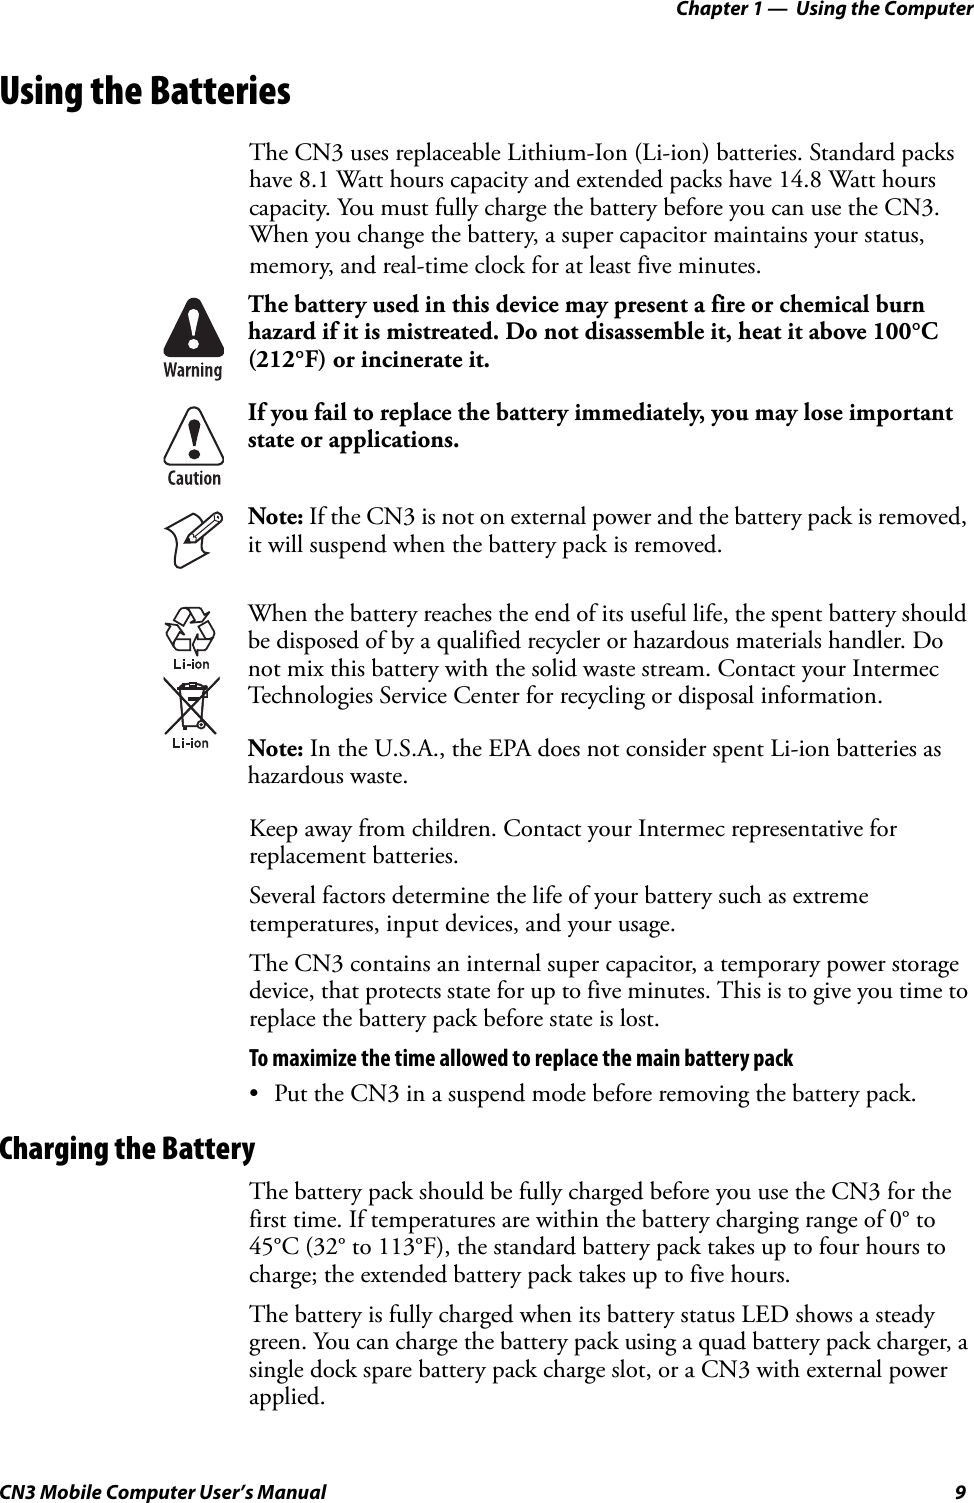 Chapter 1 —  Using the ComputerCN3 Mobile Computer User’s Manual 9Using the BatteriesThe CN3 uses replaceable Lithium-Ion (Li-ion) batteries. Standard packs have 8.1 Watt hours capacity and extended packs have 14.8 Watt hours capacity. You must fully charge the battery before you can use the CN3. When you change the battery, a super capacitor maintains your status, memory, and real-time clock for at least five minutes.Keep away from children. Contact your Intermec representative for replacement batteries. Several factors determine the life of your battery such as extreme temperatures, input devices, and your usage.The CN3 contains an internal super capacitor, a temporary power storage device, that protects state for up to five minutes. This is to give you time to replace the battery pack before state is lost. To maximize the time allowed to replace the main battery pack• Put the CN3 in a suspend mode before removing the battery pack.Charging the BatteryThe battery pack should be fully charged before you use the CN3 for the first time. If temperatures are within the battery charging range of 0° to 45°C (32° to 113°F), the standard battery pack takes up to four hours to charge; the extended battery pack takes up to five hours. The battery is fully charged when its battery status LED shows a steady green. You can charge the battery pack using a quad battery pack charger, a single dock spare battery pack charge slot, or a CN3 with external power applied.The battery used in this device may present a fire or chemical burn hazard if it is mistreated. Do not disassemble it, heat it above 100°C (212°F) or incinerate it.If you fail to replace the battery immediately, you may lose important state or applications.Note: If the CN3 is not on external power and the battery pack is removed, it will suspend when the battery pack is removed.When the battery reaches the end of its useful life, the spent battery should be disposed of by a qualified recycler or hazardous materials handler. Do not mix this battery with the solid waste stream. Contact your Intermec Technologies Service Center for recycling or disposal information.Note: In the U.S.A., the EPA does not consider spent Li-ion batteries as hazardous waste.